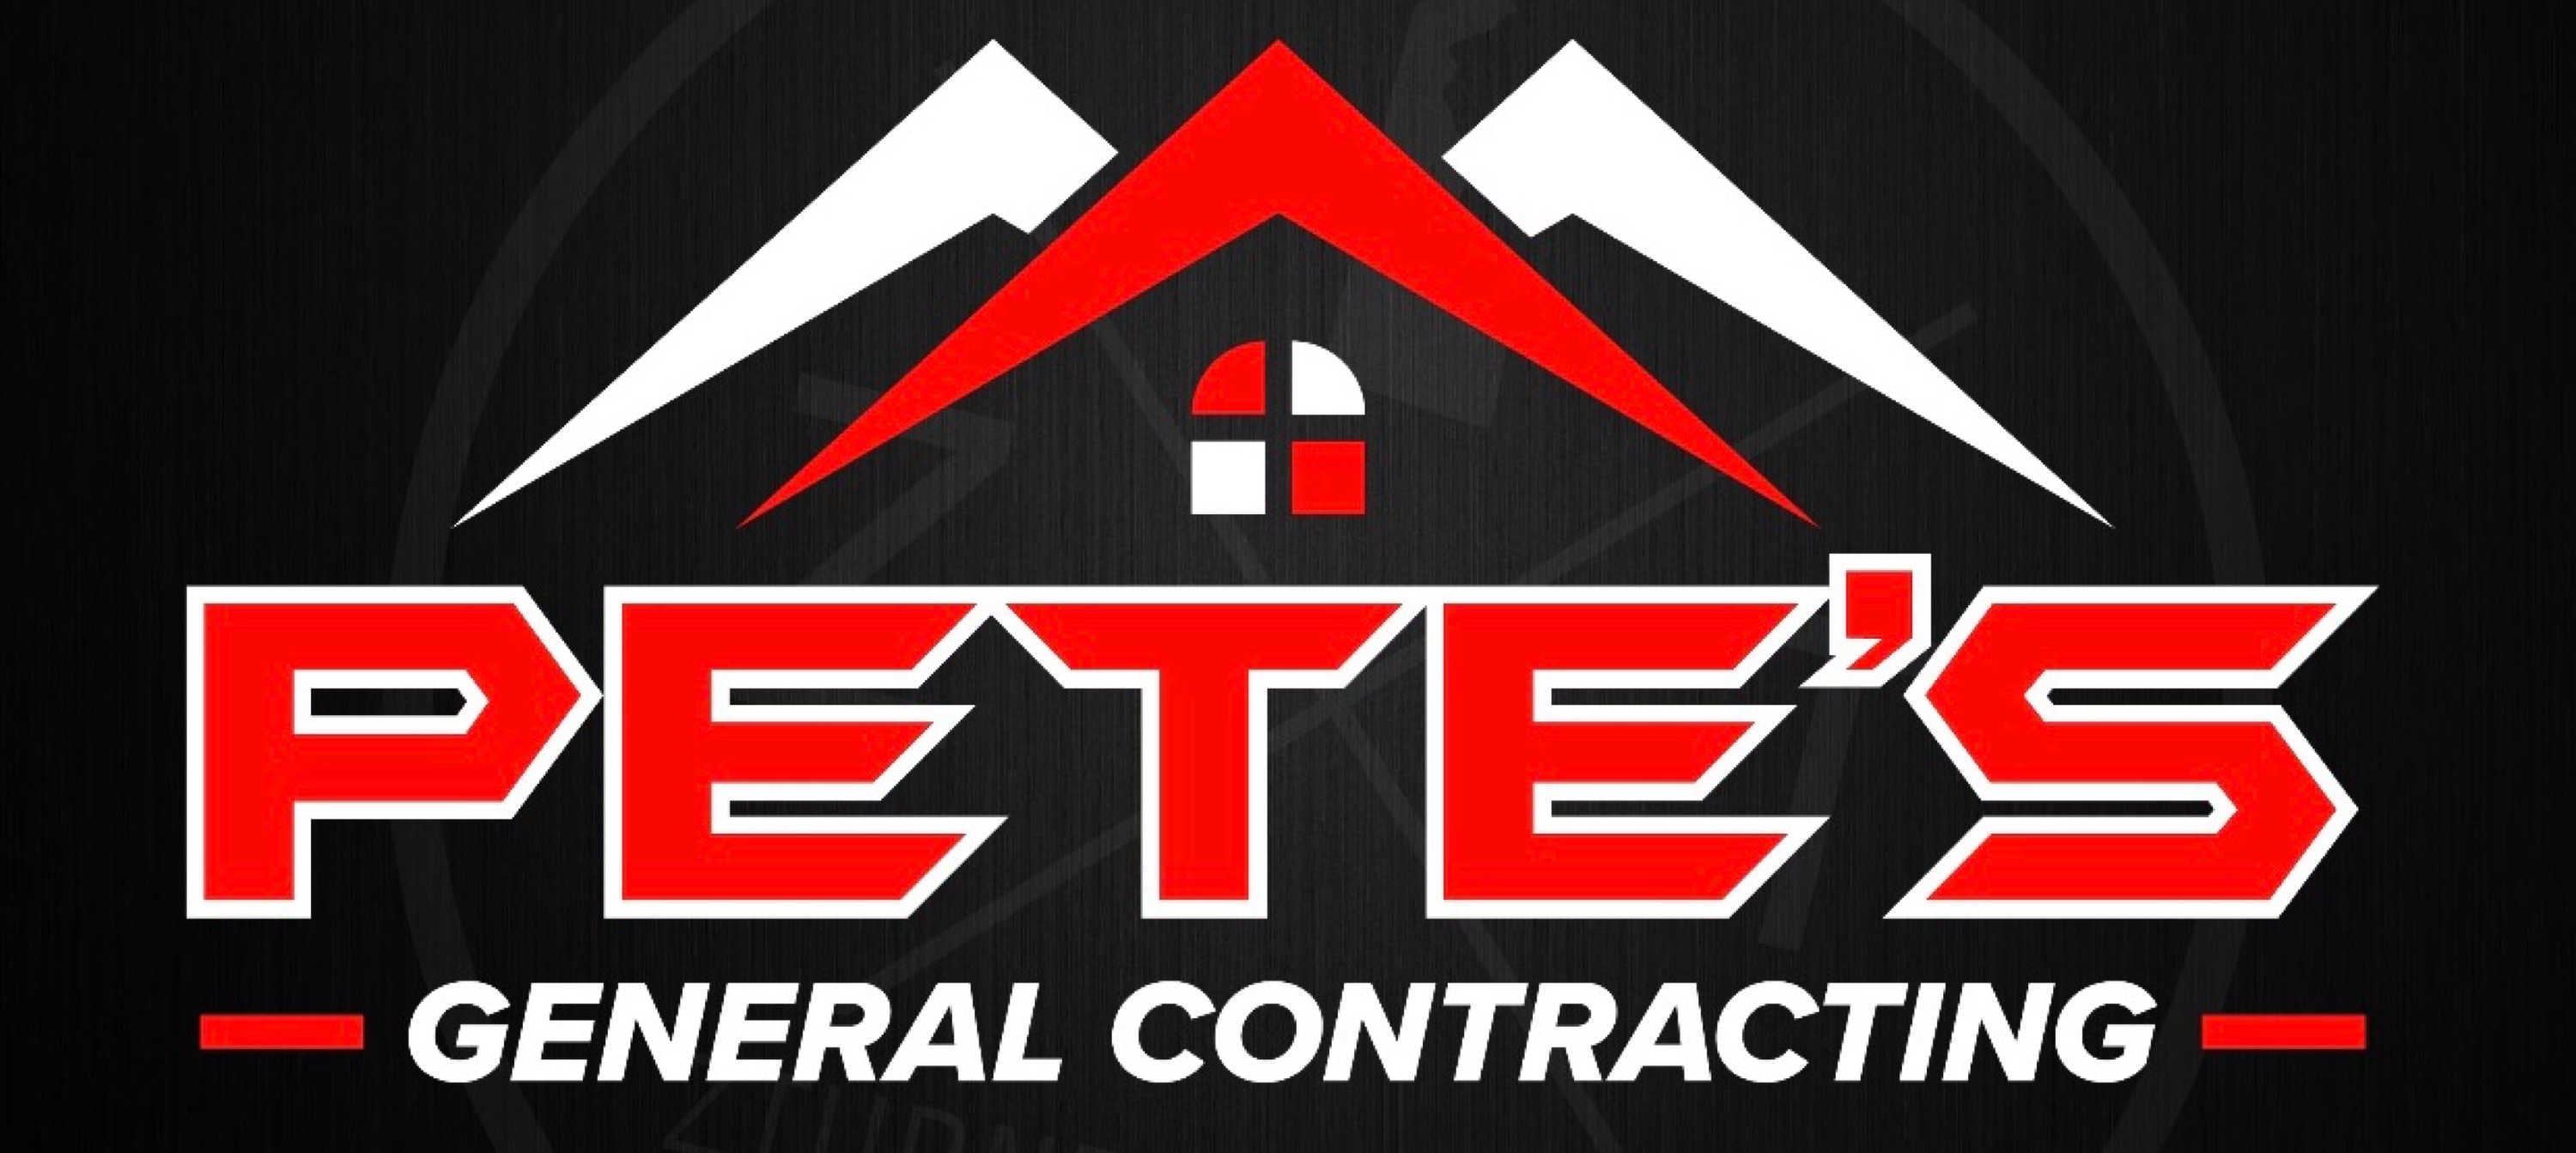 Petes General Contracting Logo